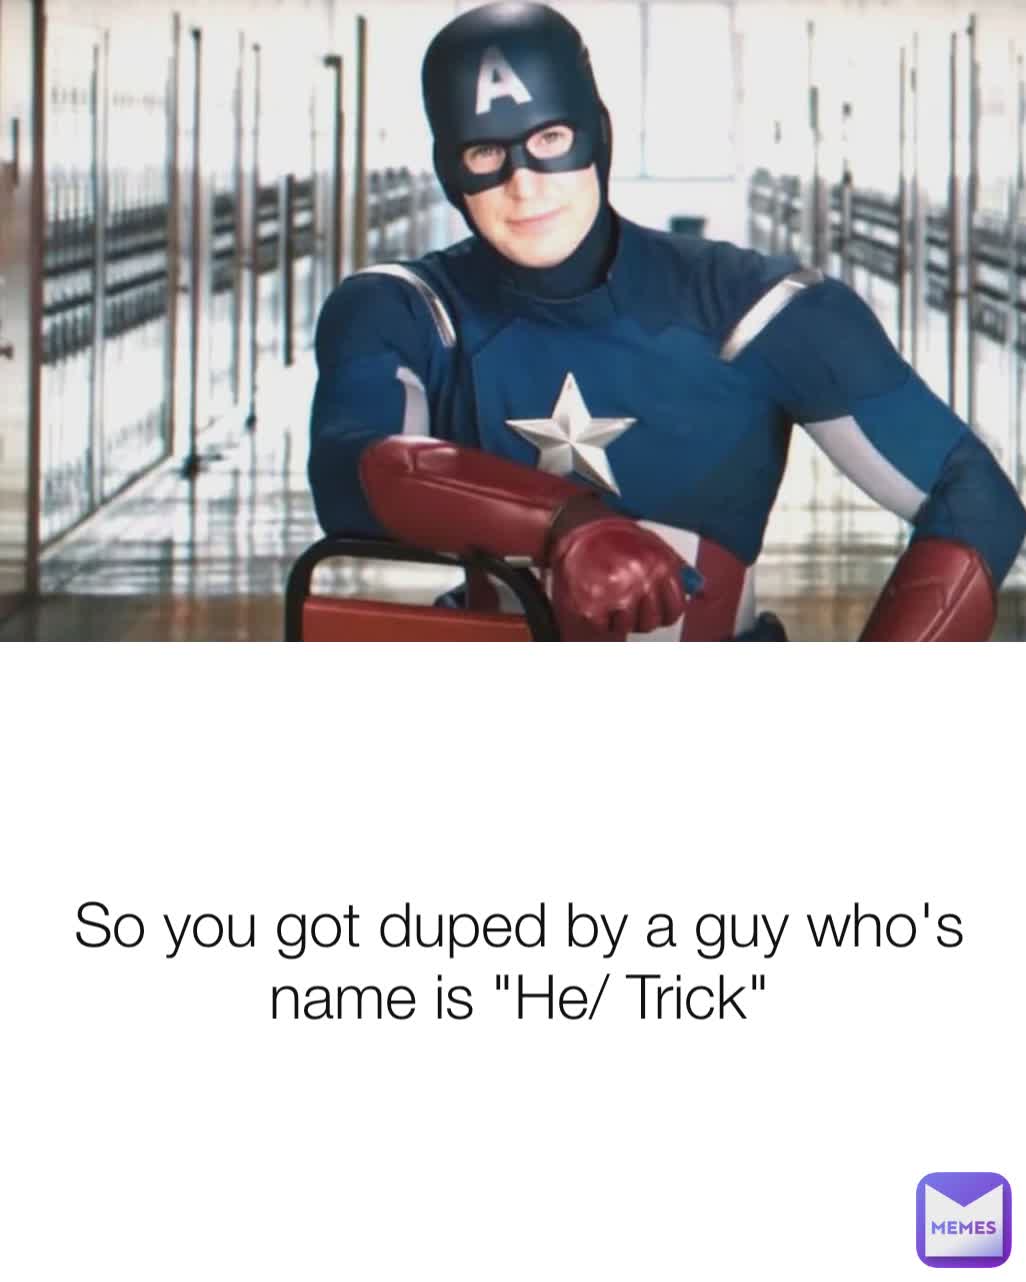 So you got duped by a guy who's name is "He/ Trick"